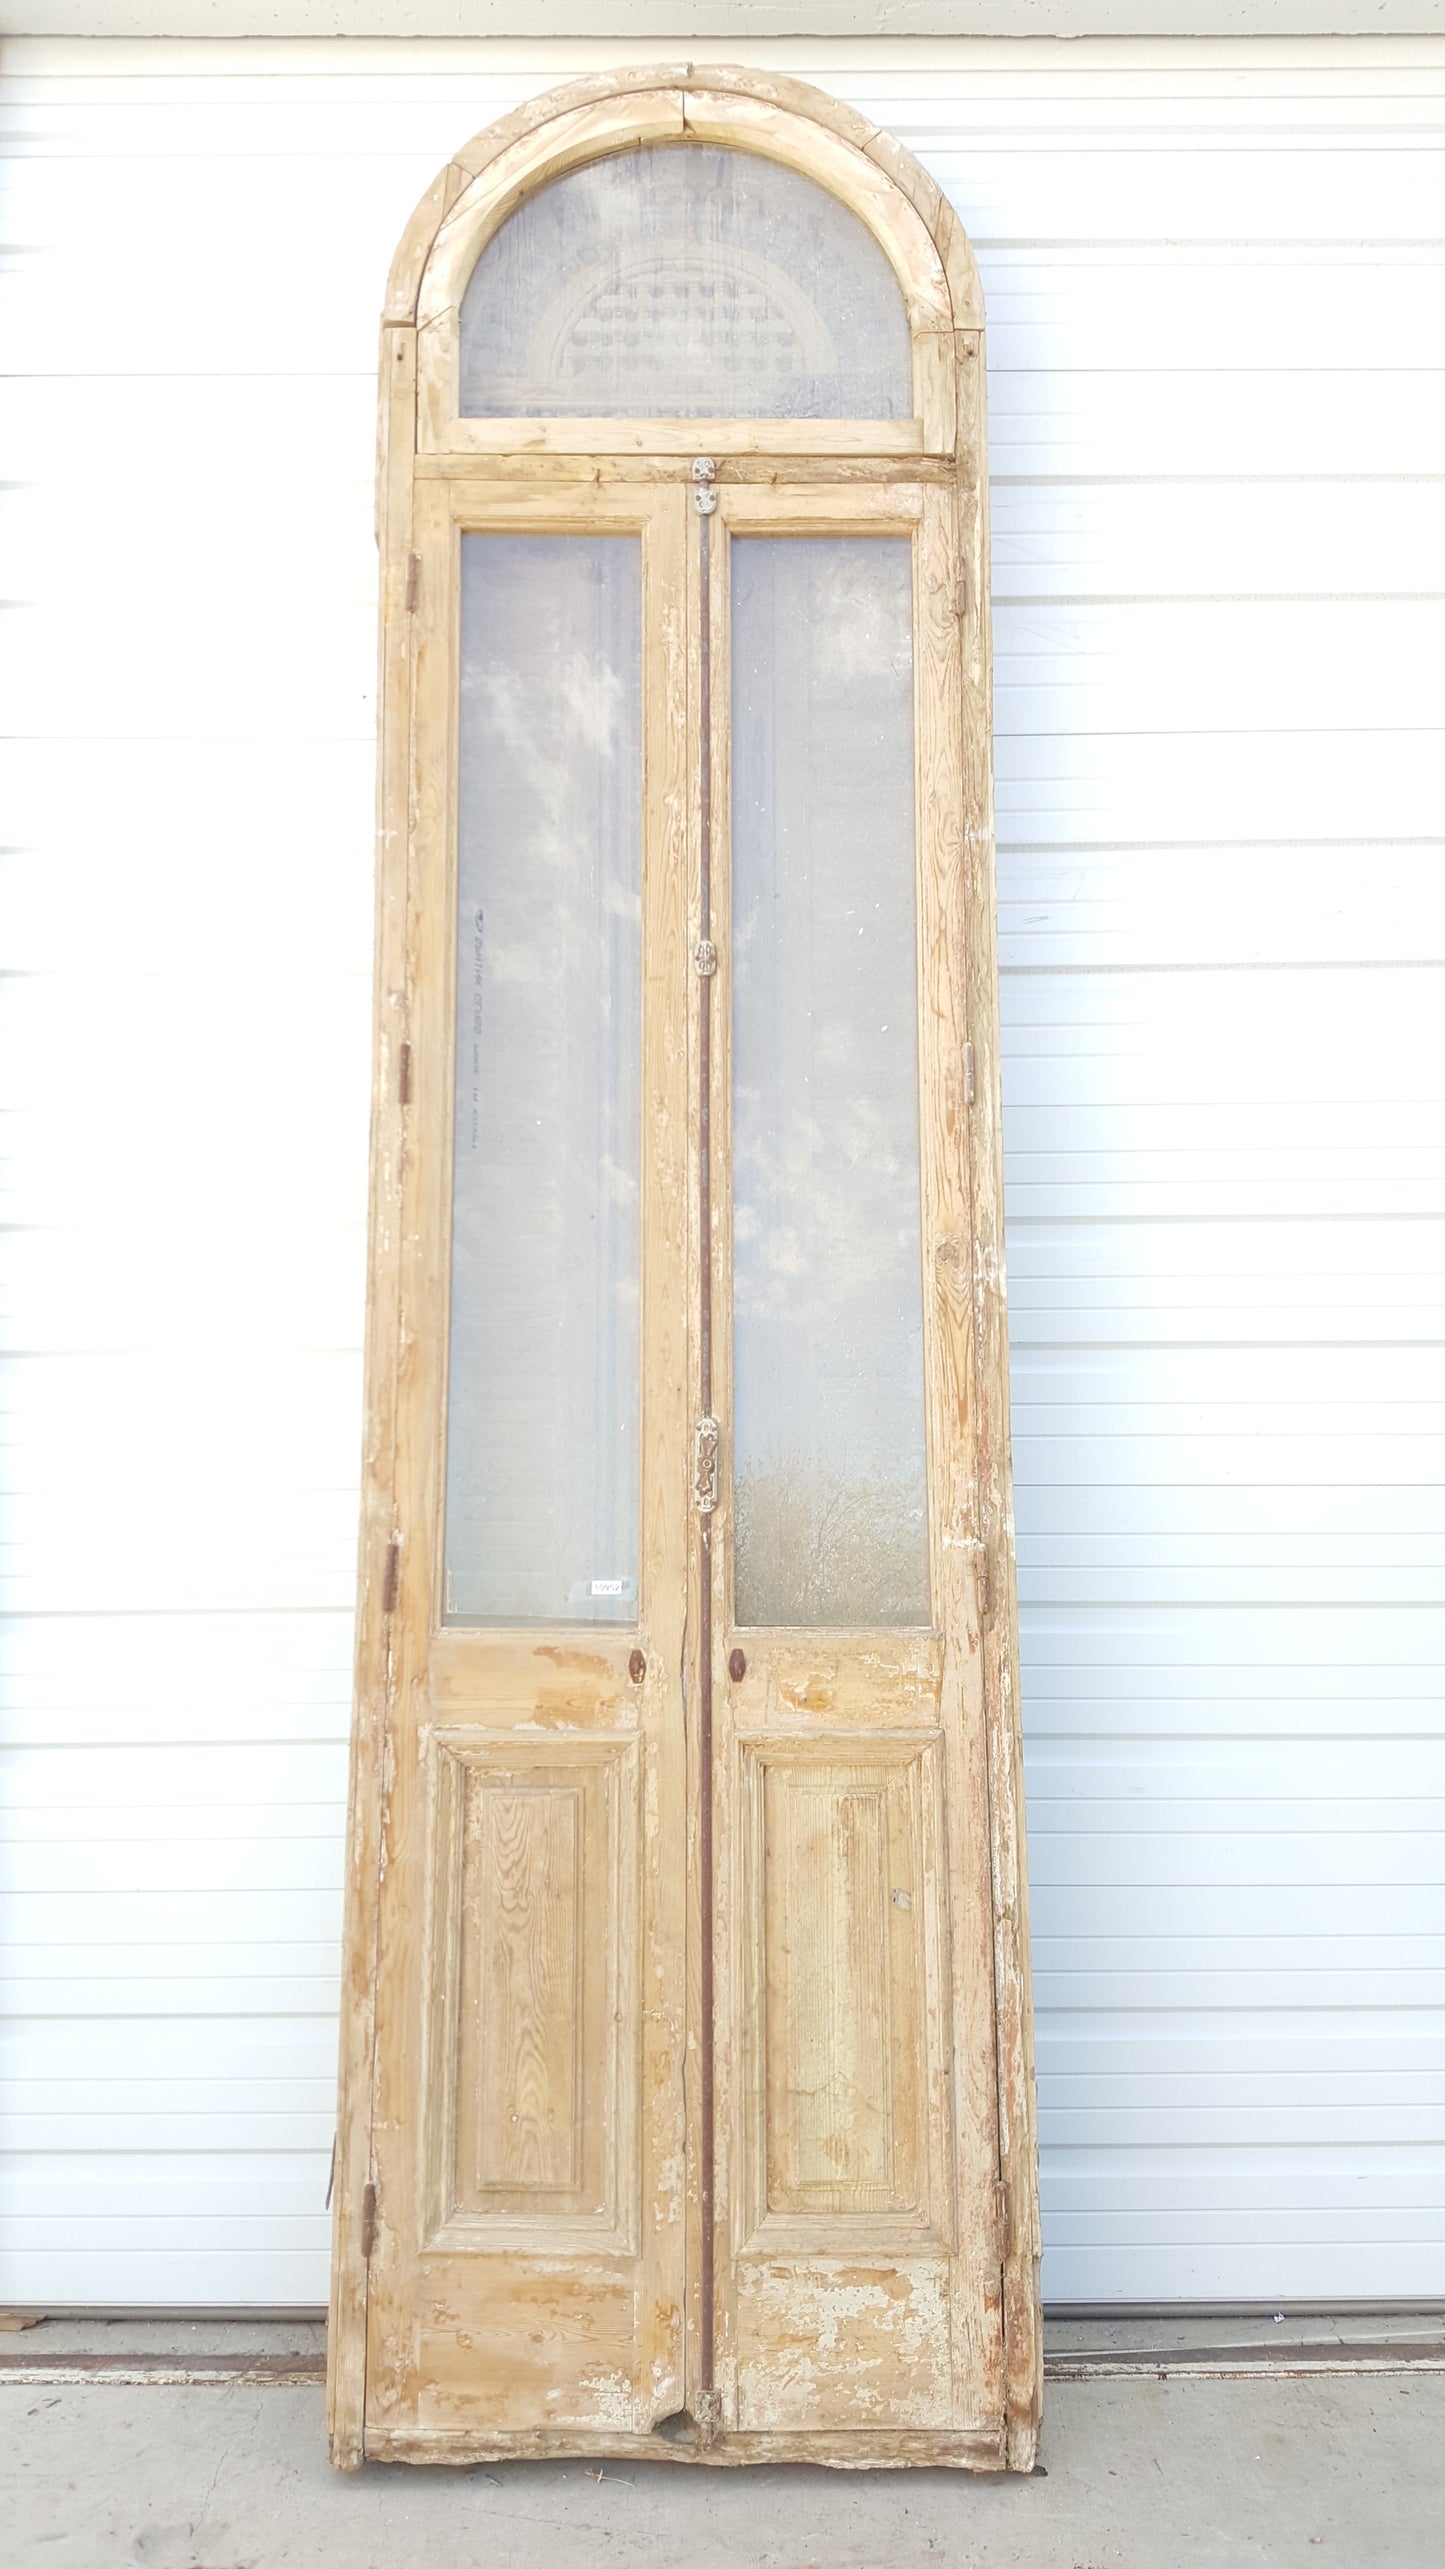 Pair of Antique French Doors and Shutters with Ornate Spindled Transom